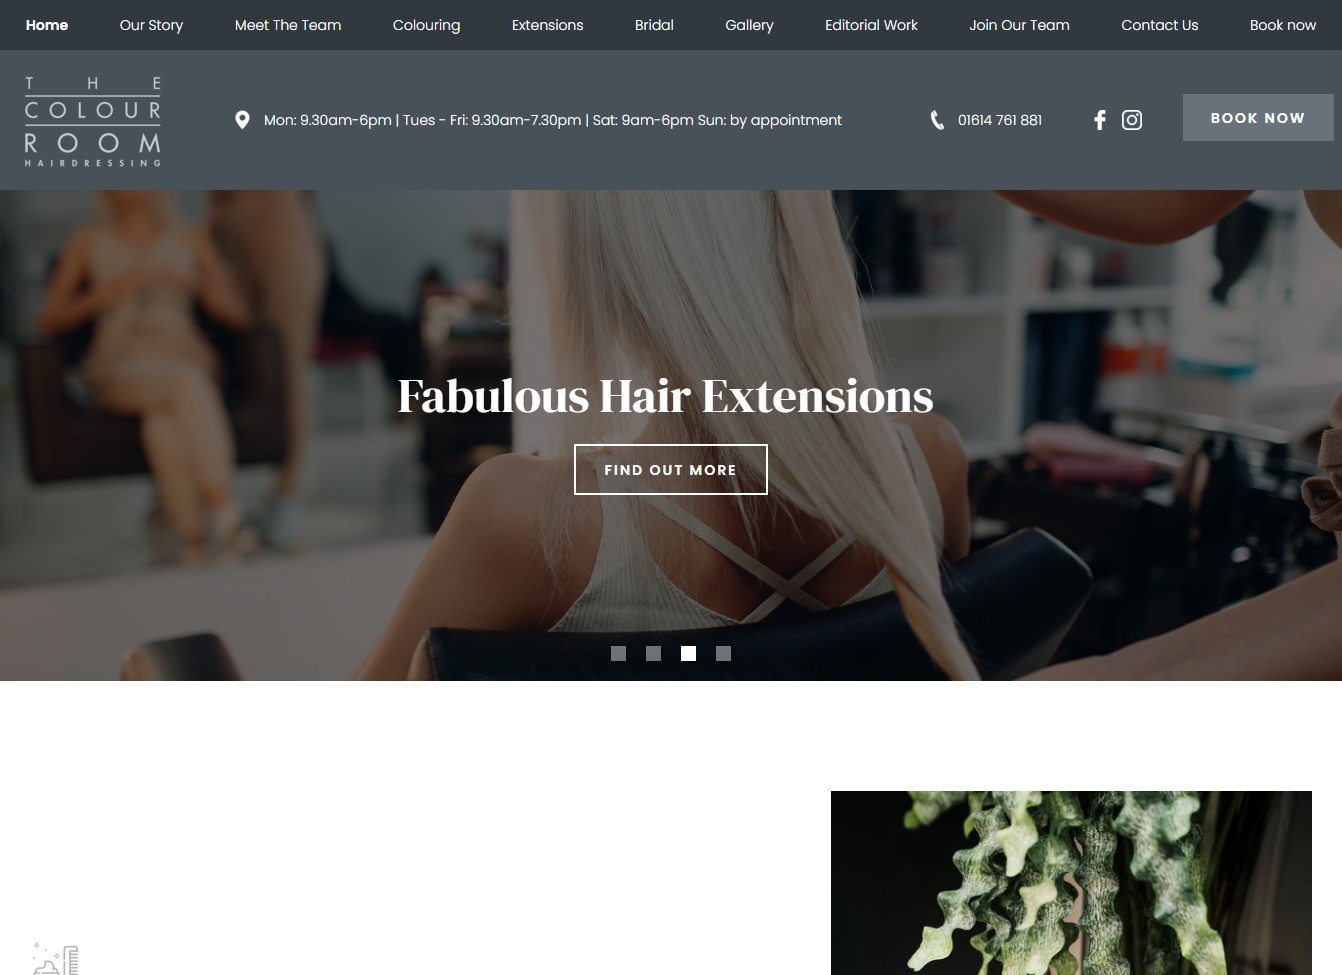 The Colour Room Hairdressers website